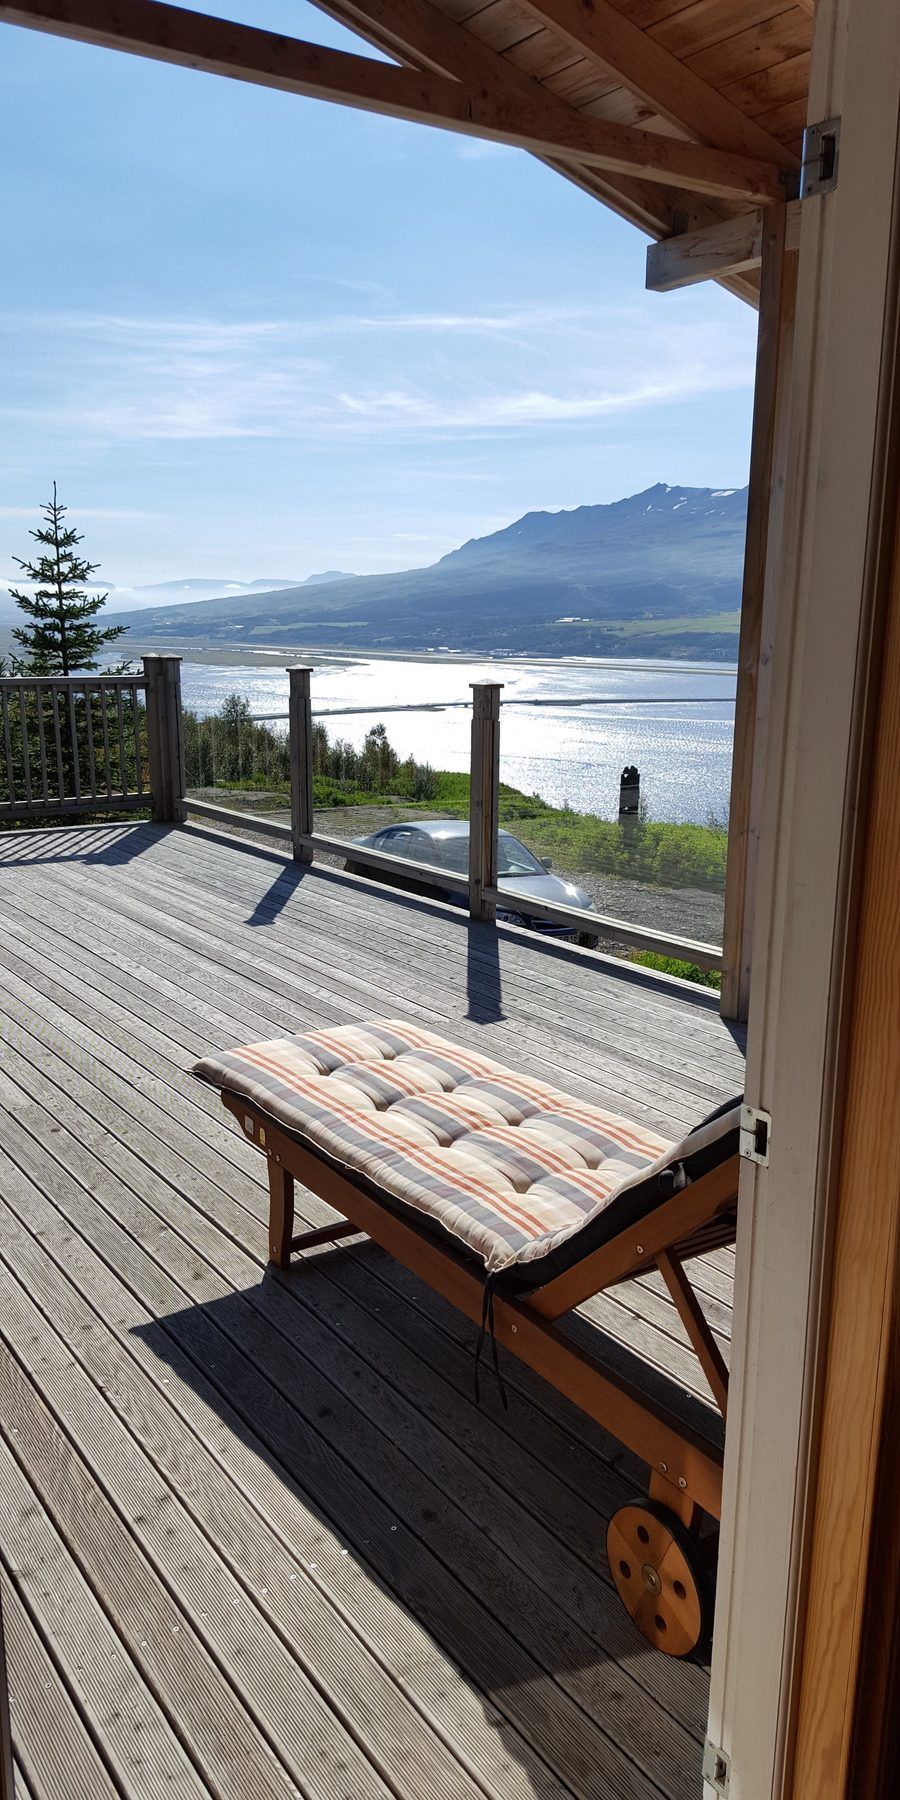 The large terrace with the impressive view of Eyjafjörður invites you to sunbathe and relax